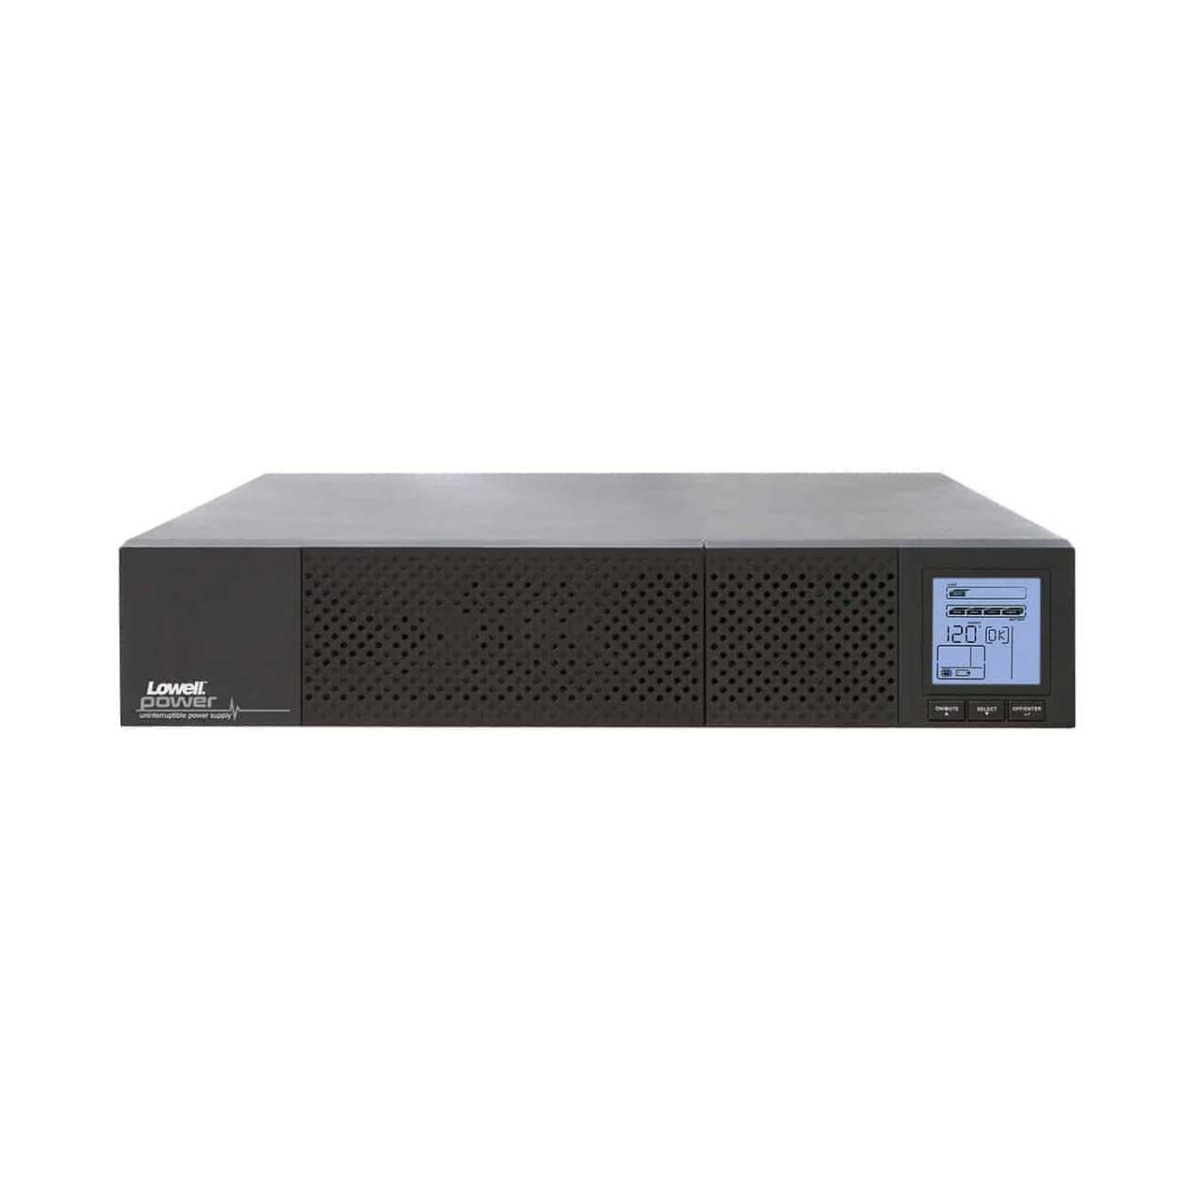 Picture of Lowell Manufacturing LMC-UPS8-1100 UPS8-1100 Line-Interactive UPS - Lead-Acid - 1100VA - 990W